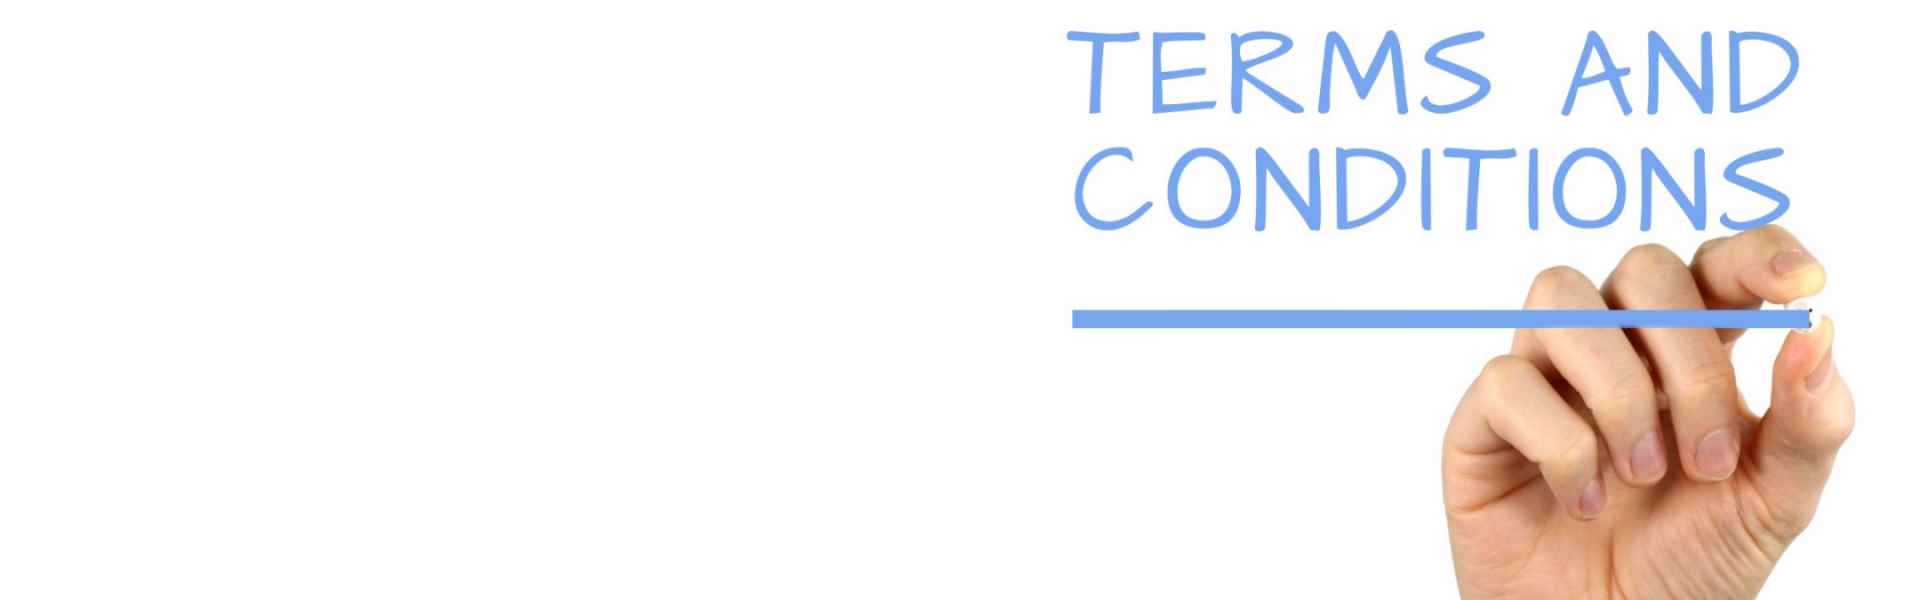 Terms and Conditions Banner